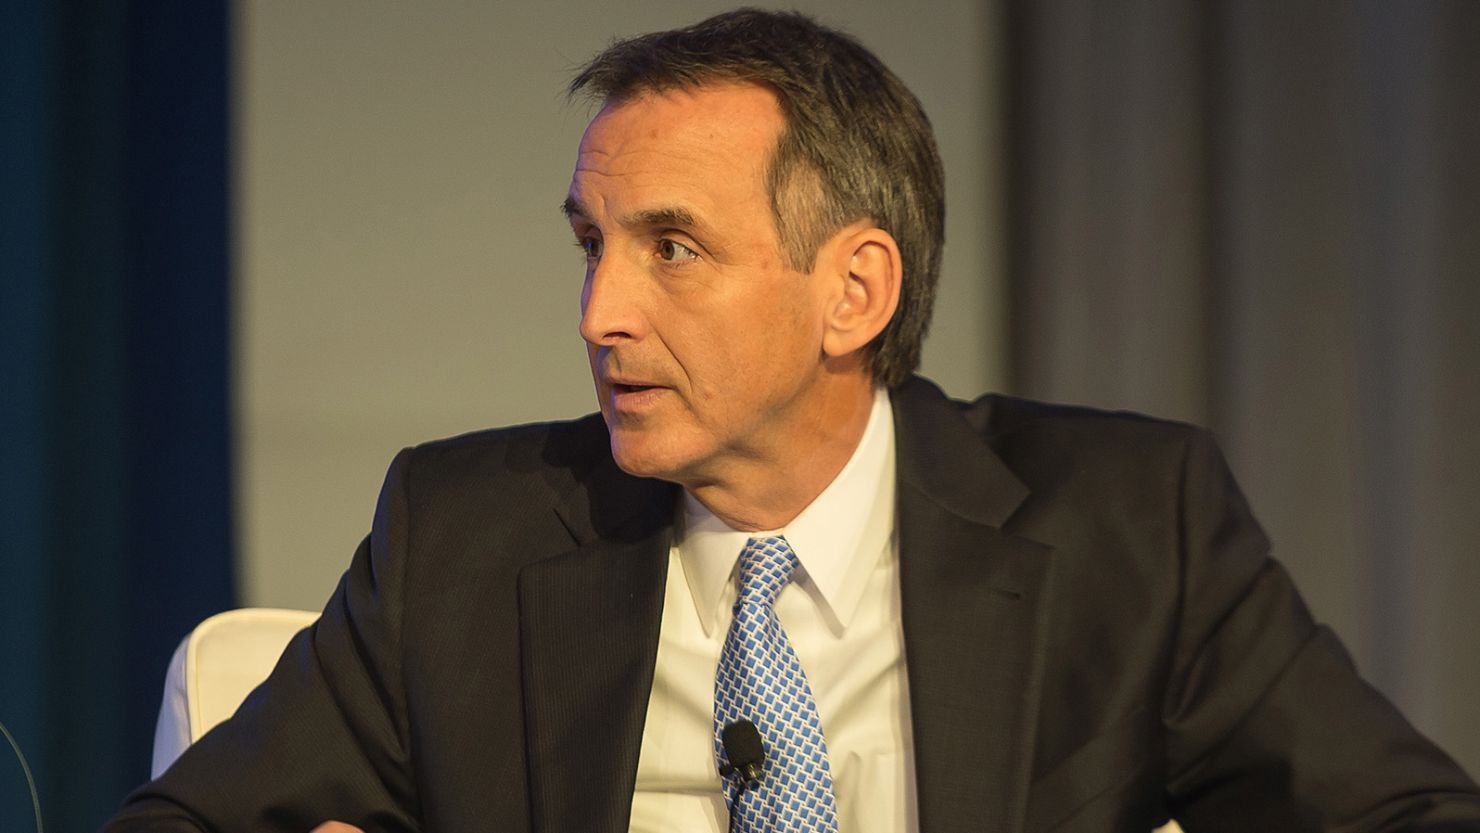 CEO of Financial Services Roundtable Tim Pawlenty speaks onstage during the 2016 HOPE Global Forum at Atlanta Marriott Marquis on January 14, 2016 in Atlanta, Georgia. 